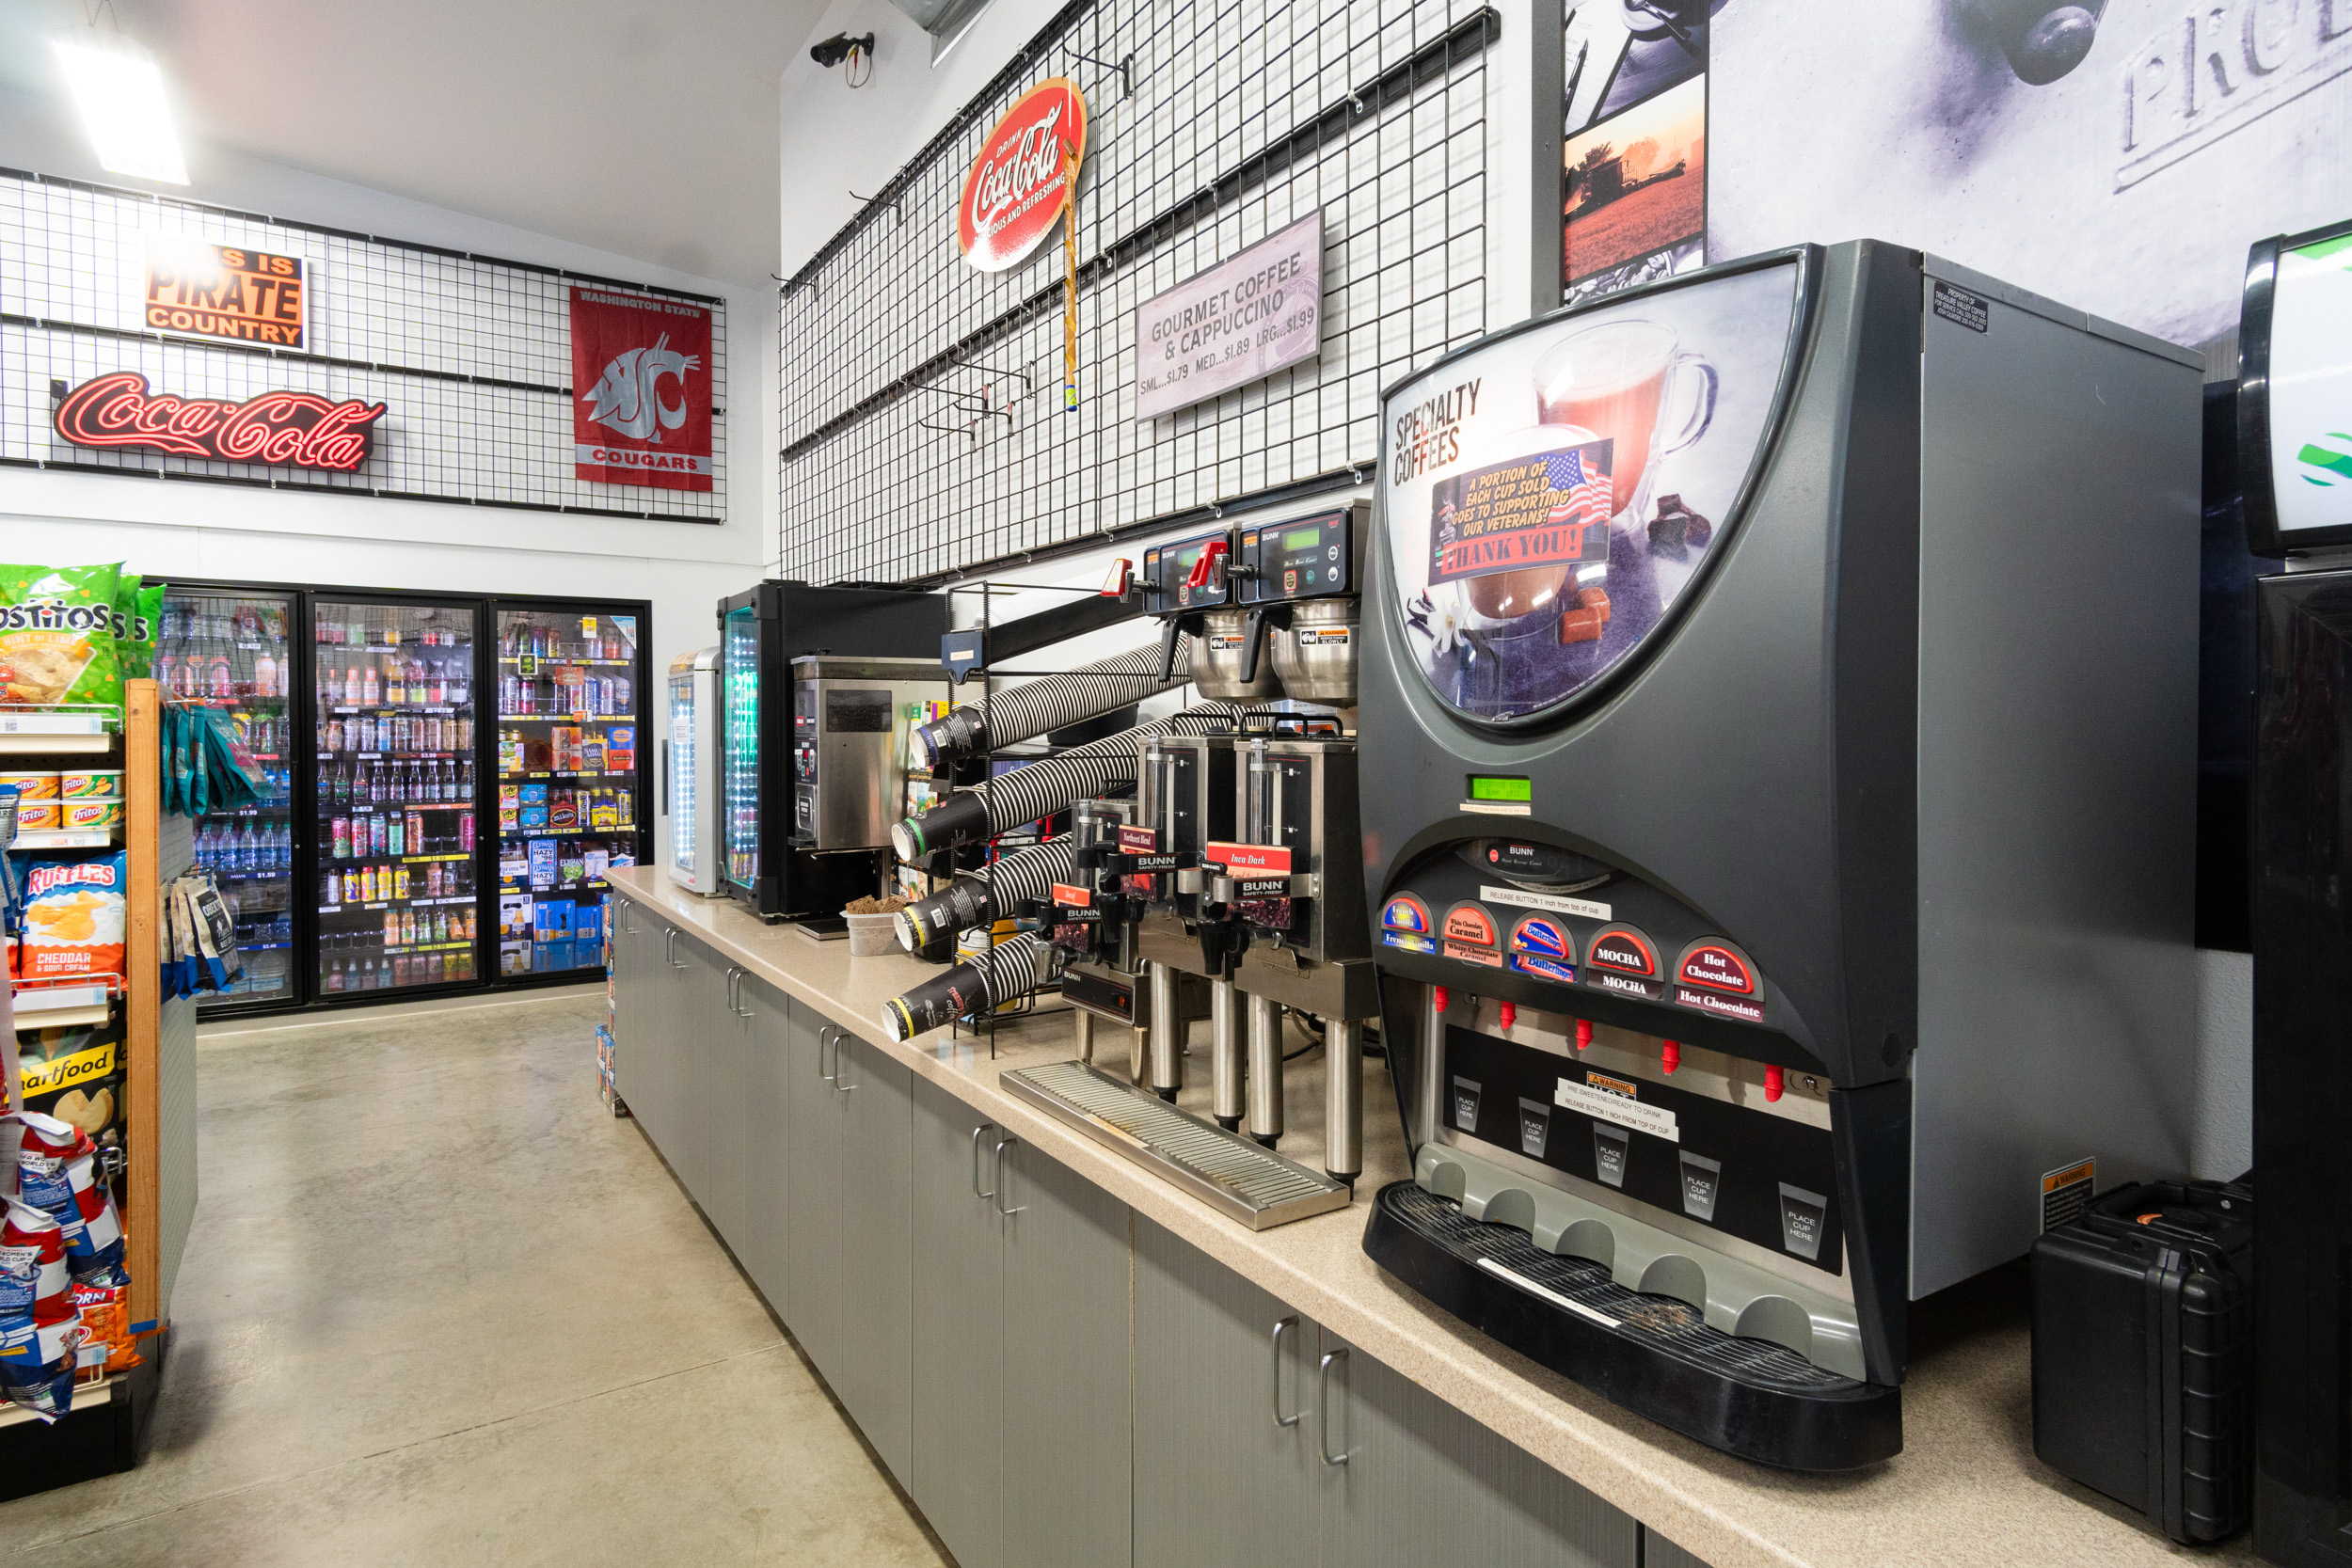 The coffee station at a Four Star Supply convenience store